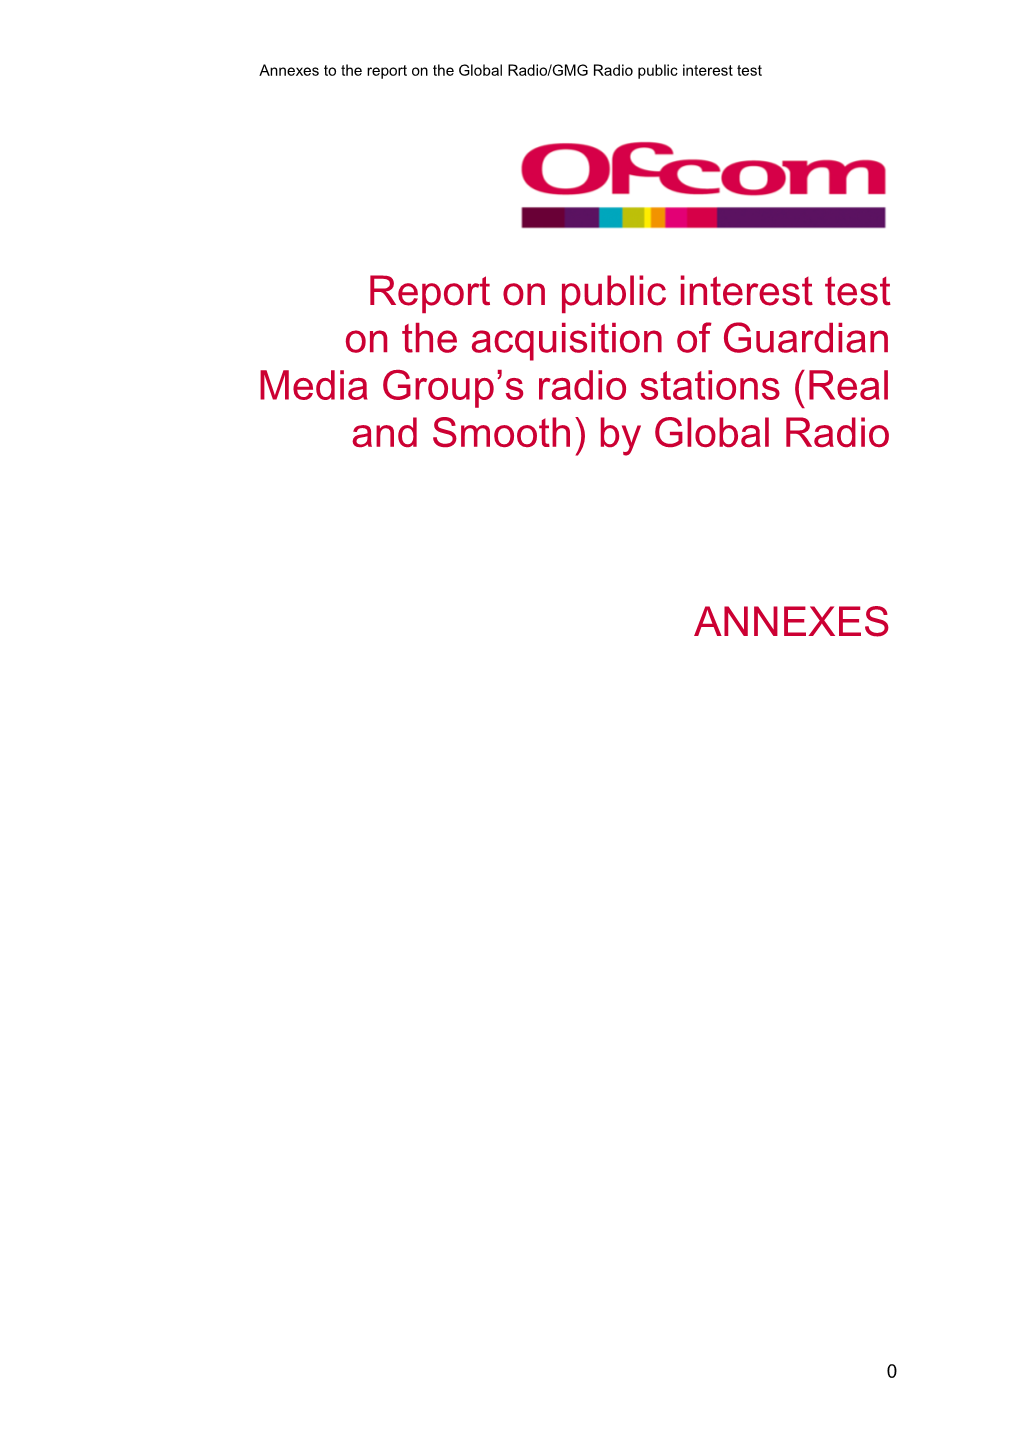 Report on Public Interest Test on the Acquisition of Guardian Media Group's Radio Stations (Real and Smooth) by Global Radio A